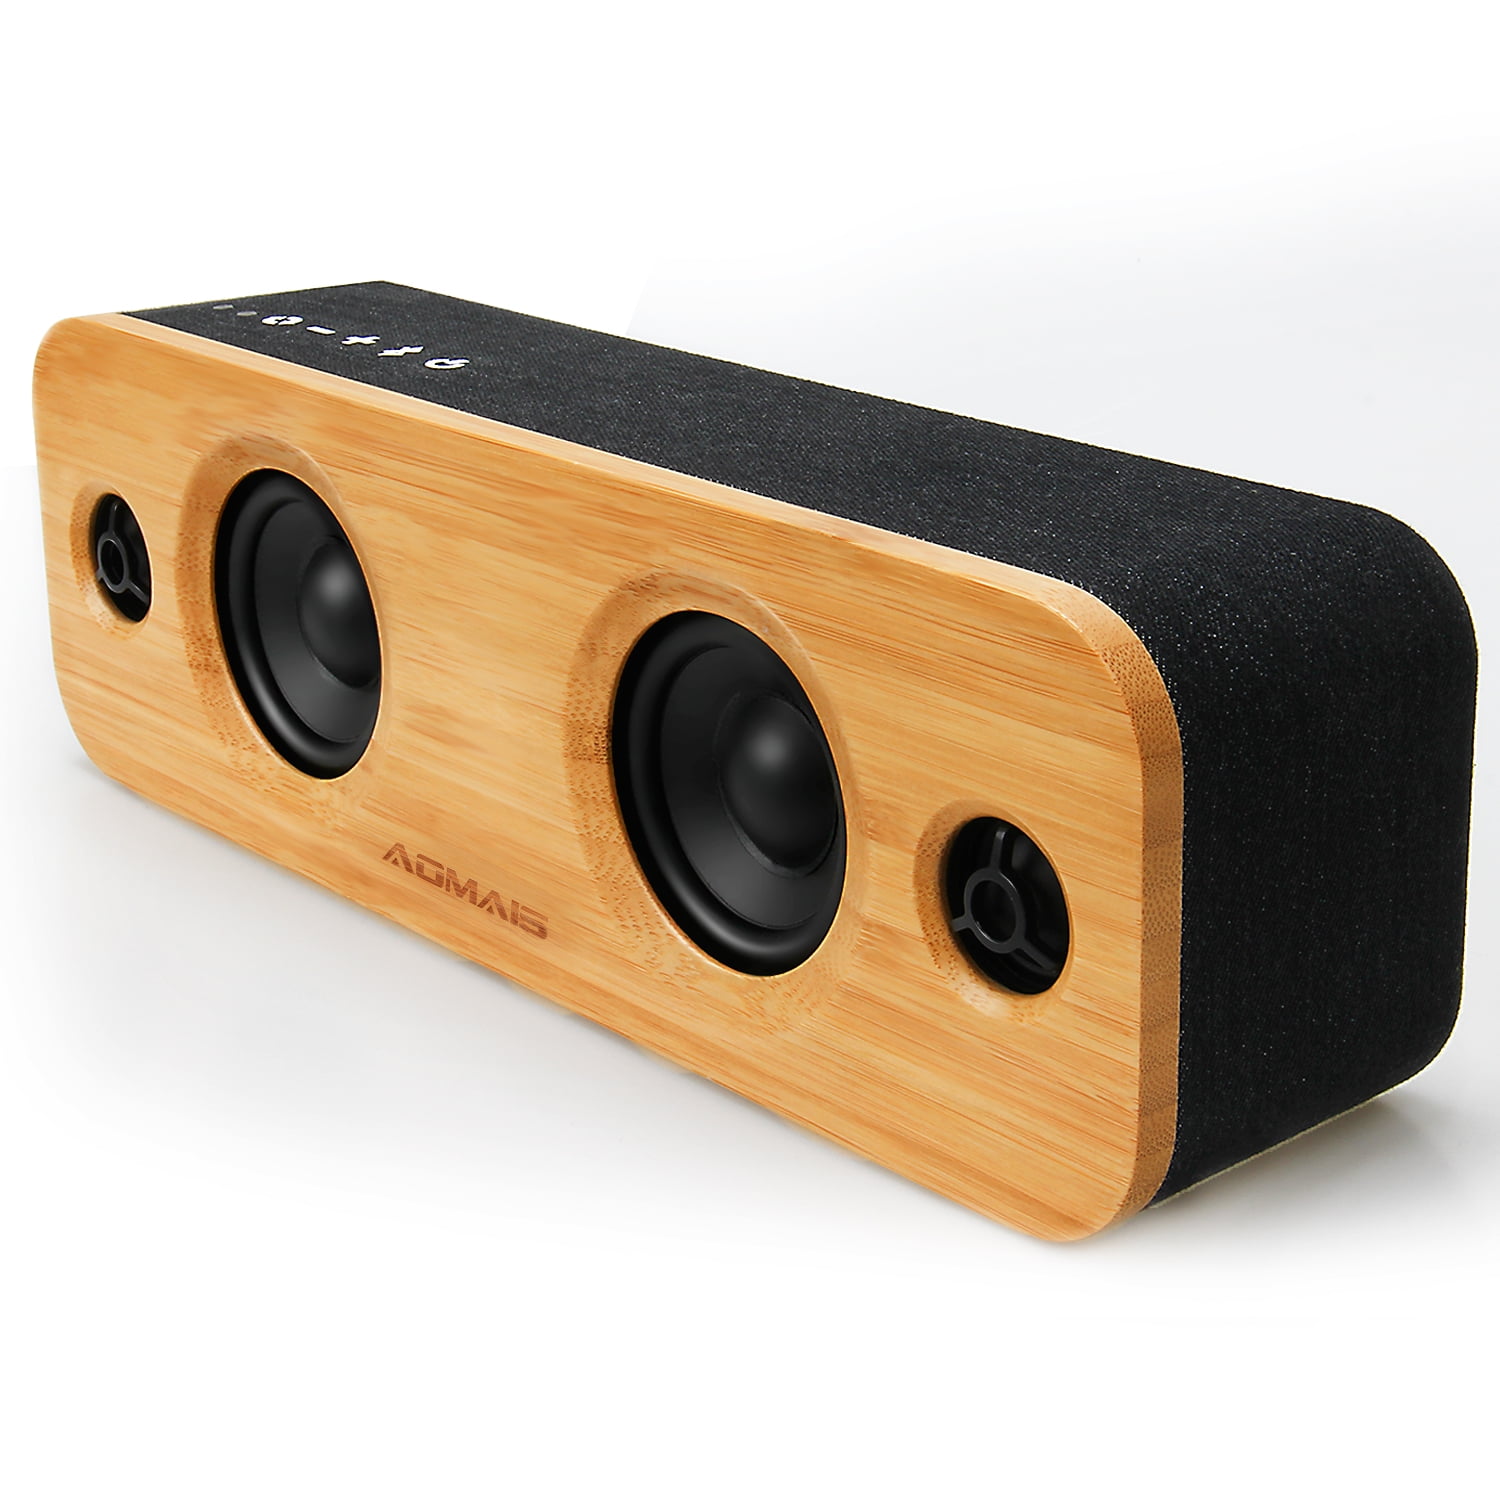 Referendum Garantie man AOMAIS LIFE 30W Bluetooth Speakers, Loud Bamboo Wood Home Audio Wireless  Speaker with Super Bass, 3EQ Modes for Home, Outdoors Party & Subwoofer -  Walmart.com